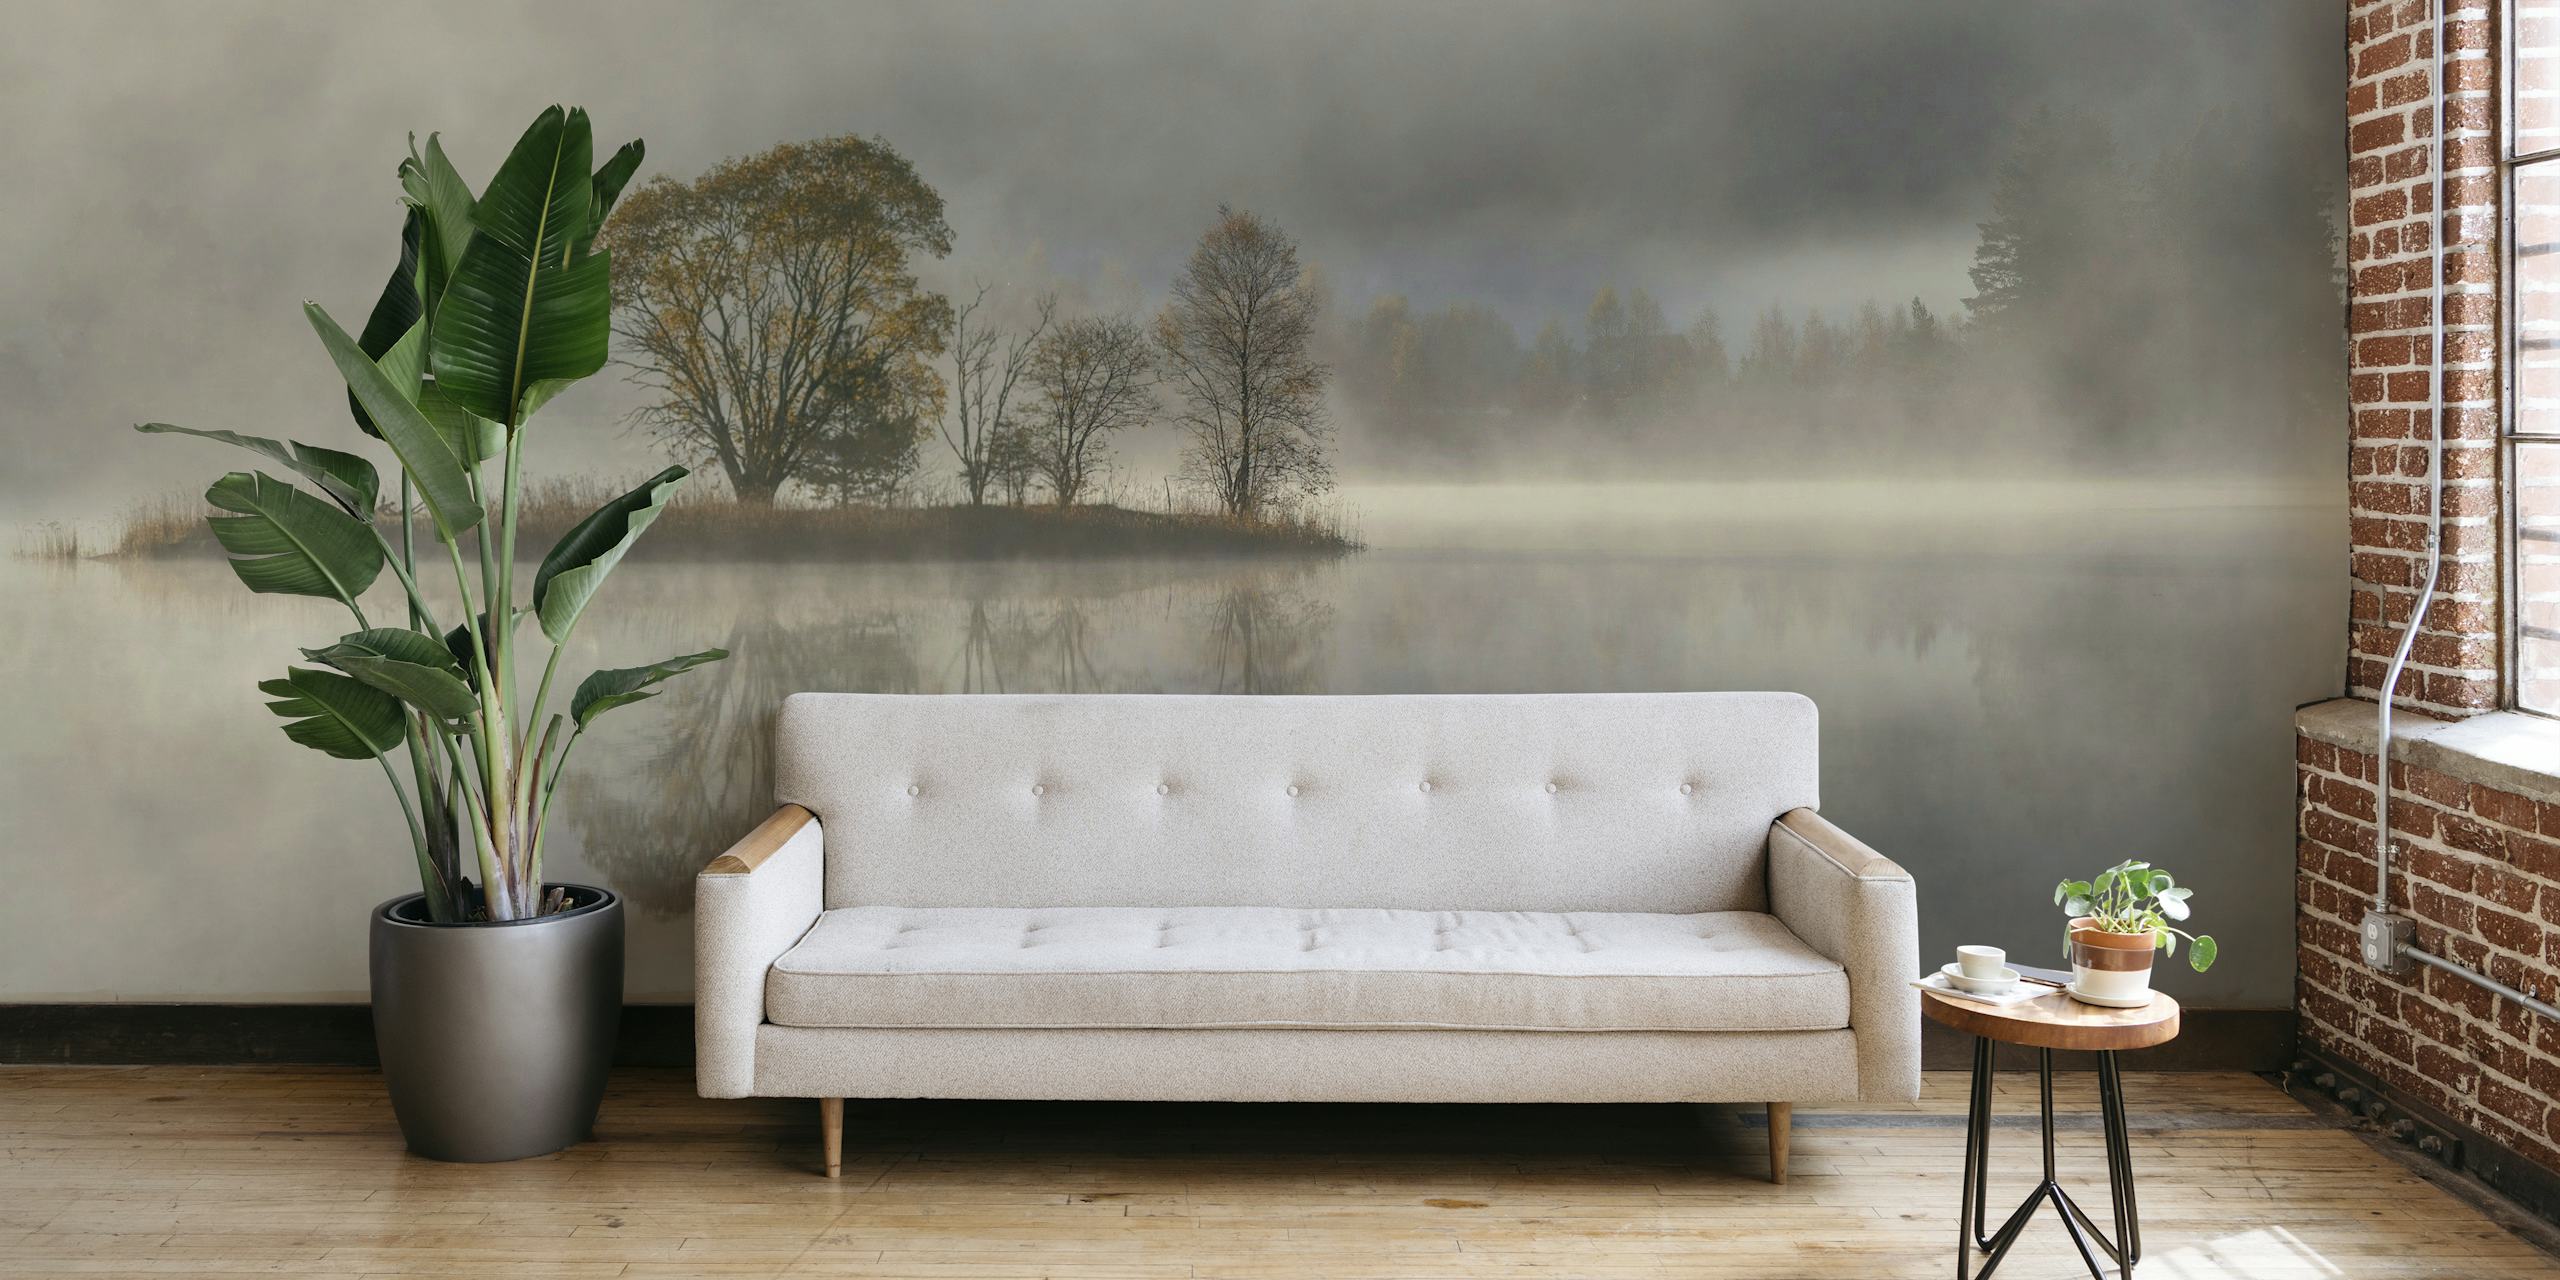 October morning wall mural with misty lakeside scene and a solitary tree